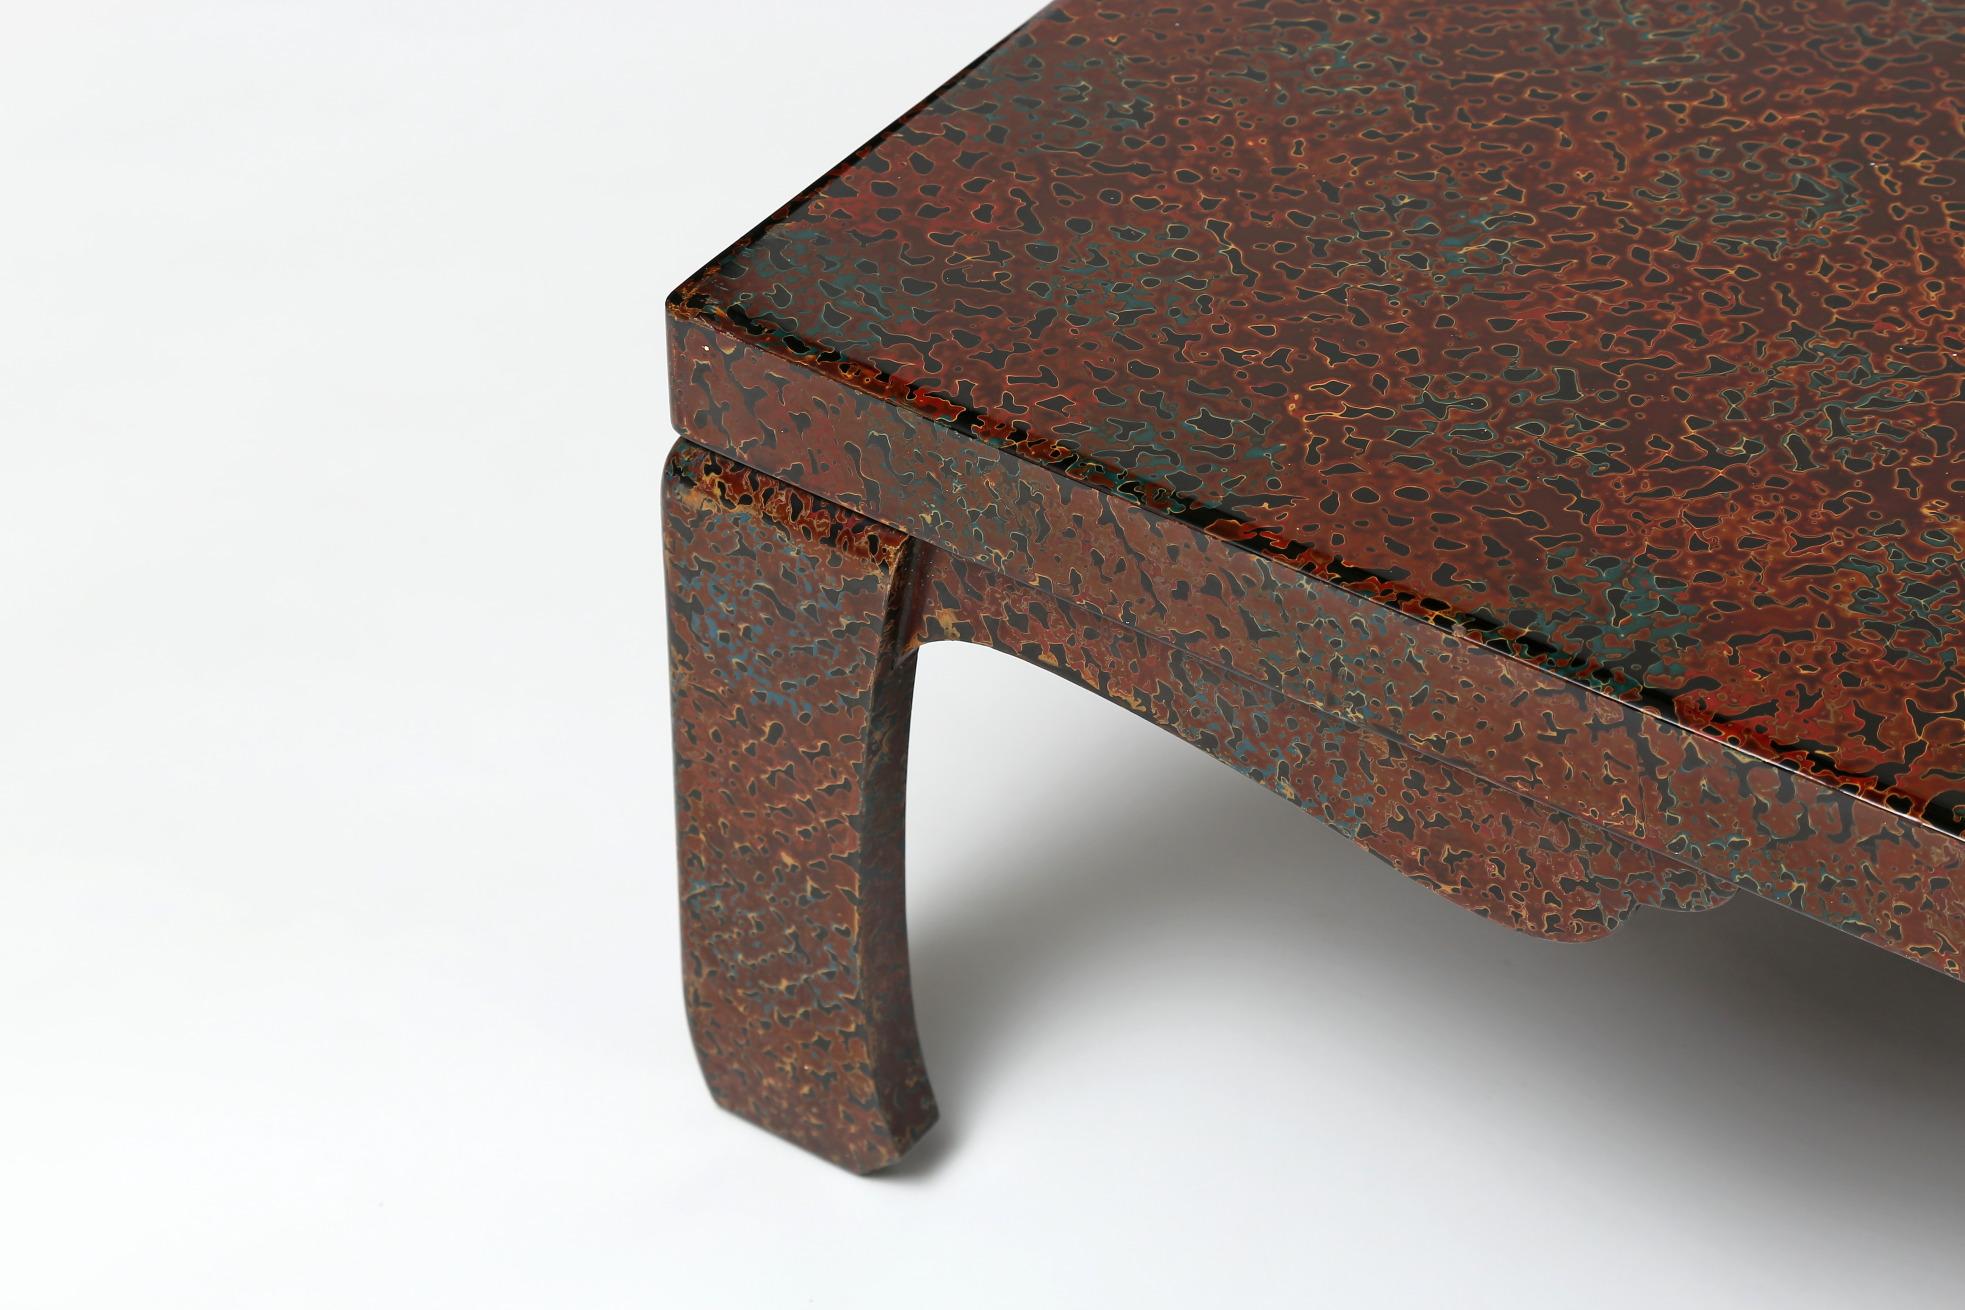 The wonderful low table with a solid plank top, supported on slightly curved corner legs with shaped spandrels, covered in special lacquer with the technique known as tsugaru where many layers of different coloured lacquers are applied, in drips and